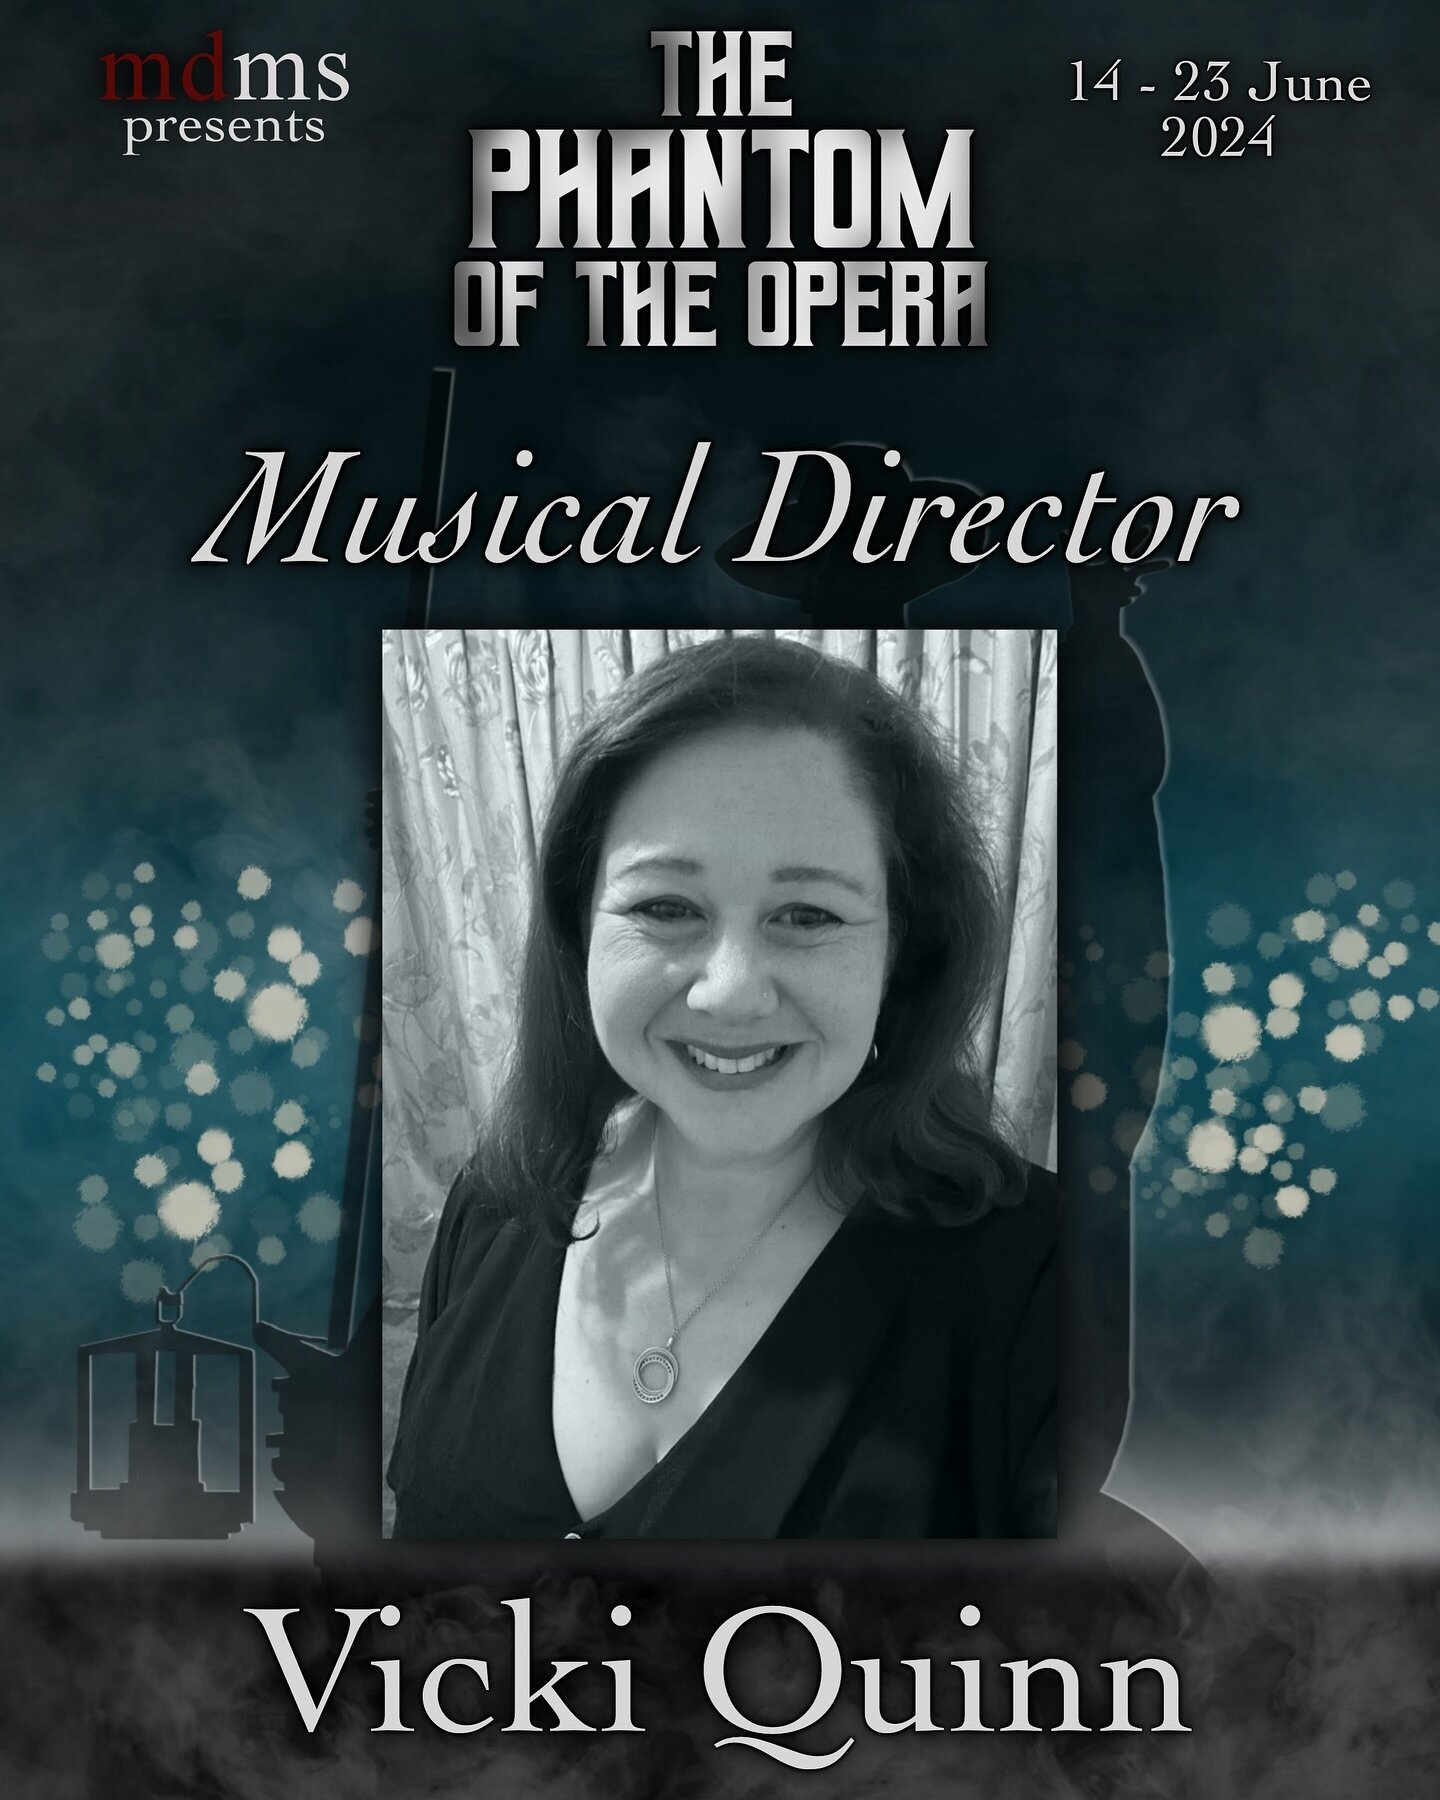 MDMS are thrilled to welcome the wonderful Vicki Quinn as Musical Director for our June 2024 production of The Phantom Of The Opera!
 
MDMS presents
🎼𝙏𝙃𝙀 𝙋𝙃𝘼𝙉𝙏𝙊𝙈 𝙊𝙁 𝙏𝙃𝙀 𝙊𝙋𝙀𝙍𝘼
🗓️14 - 23 June 2024
📍@karralyka